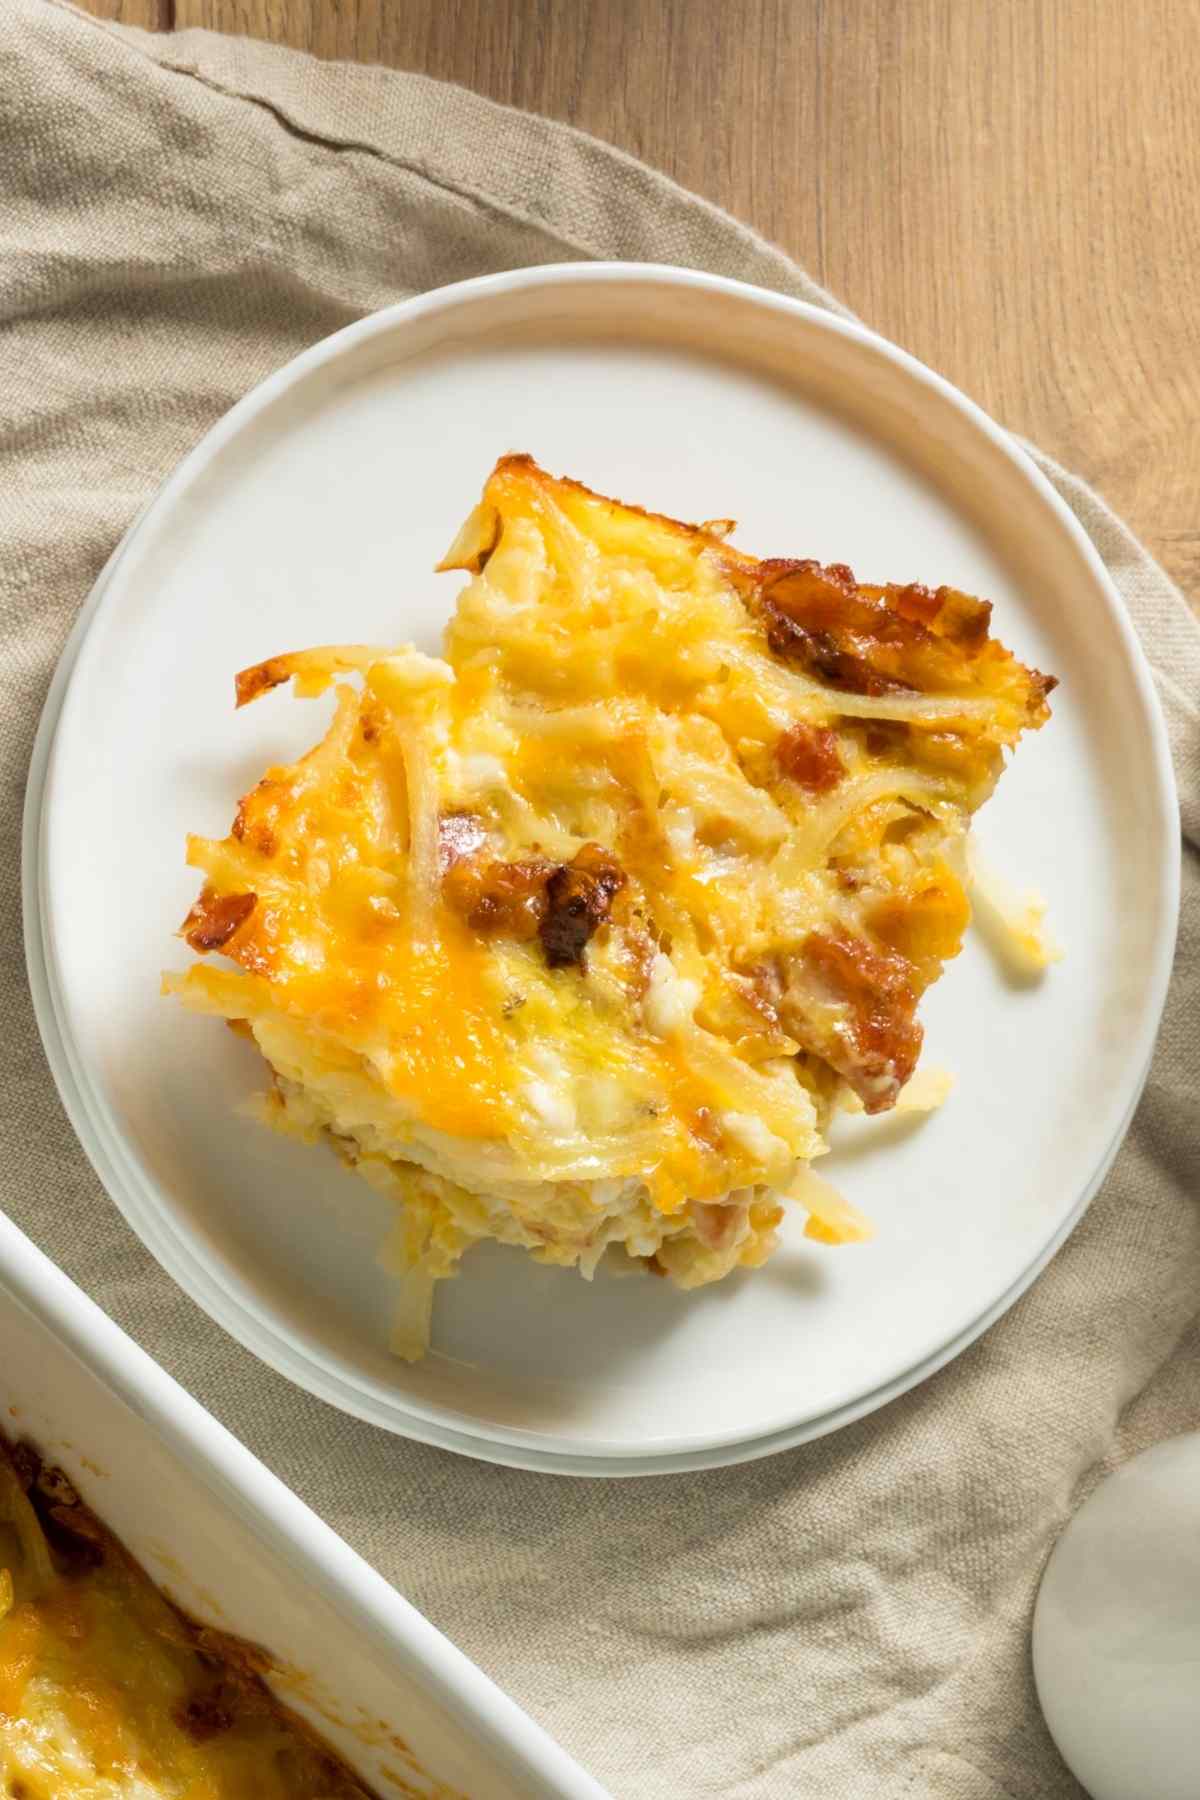 This breakfast potato casserole is ideal for weekend brunch and only takes about 40 minutes to make! Everyone will love it, including your kids.